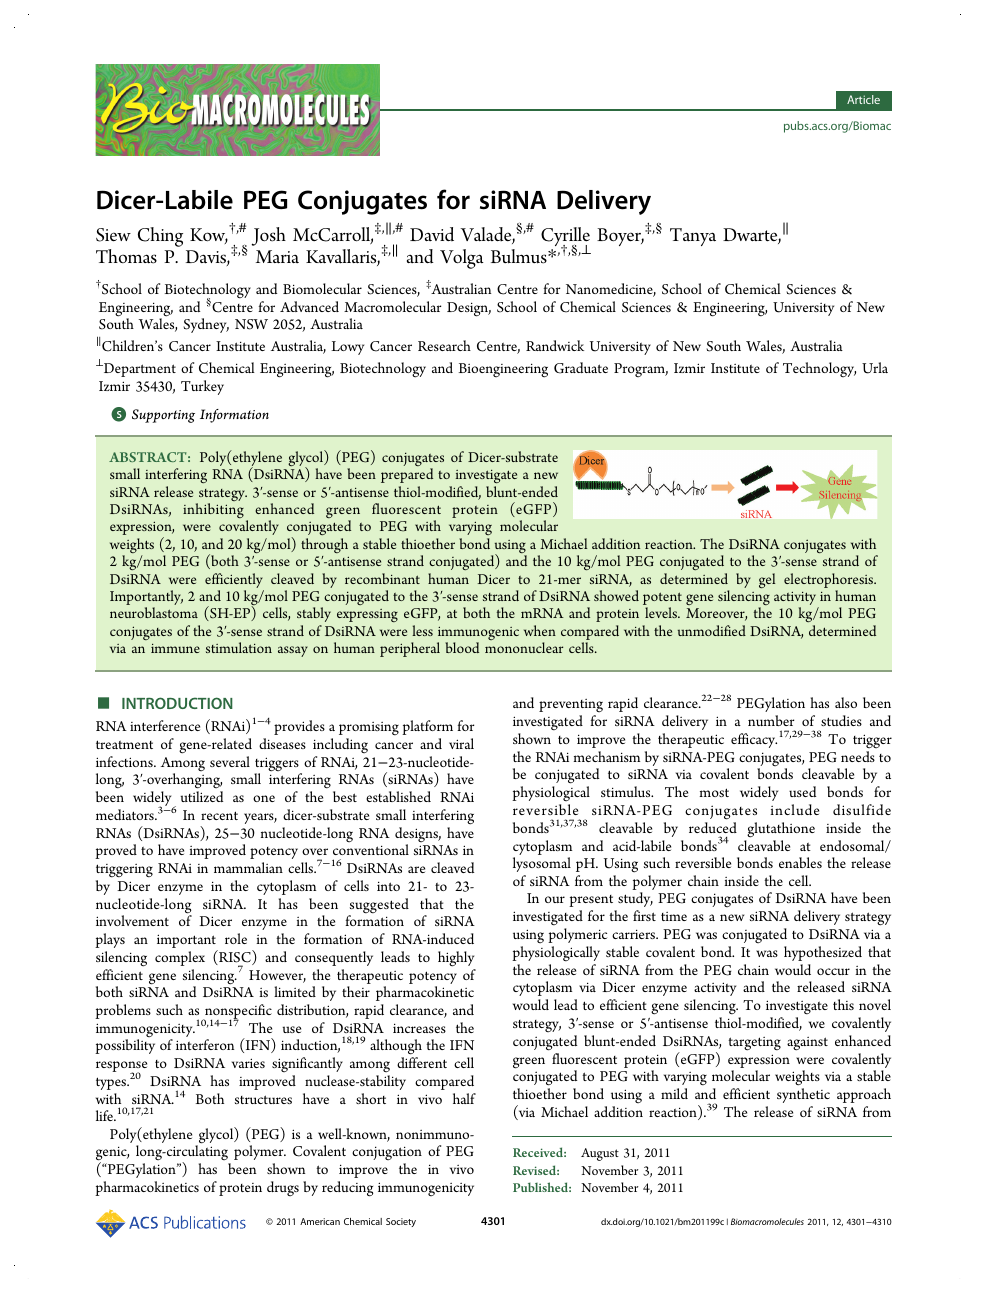 Dicer Labile Peg Conjugates For Sirna Delivery Topic Of Research Paper In Chemical Sciences Download Scholarly Article Pdf And Read For Free On Cyberleninka Open Science Hub